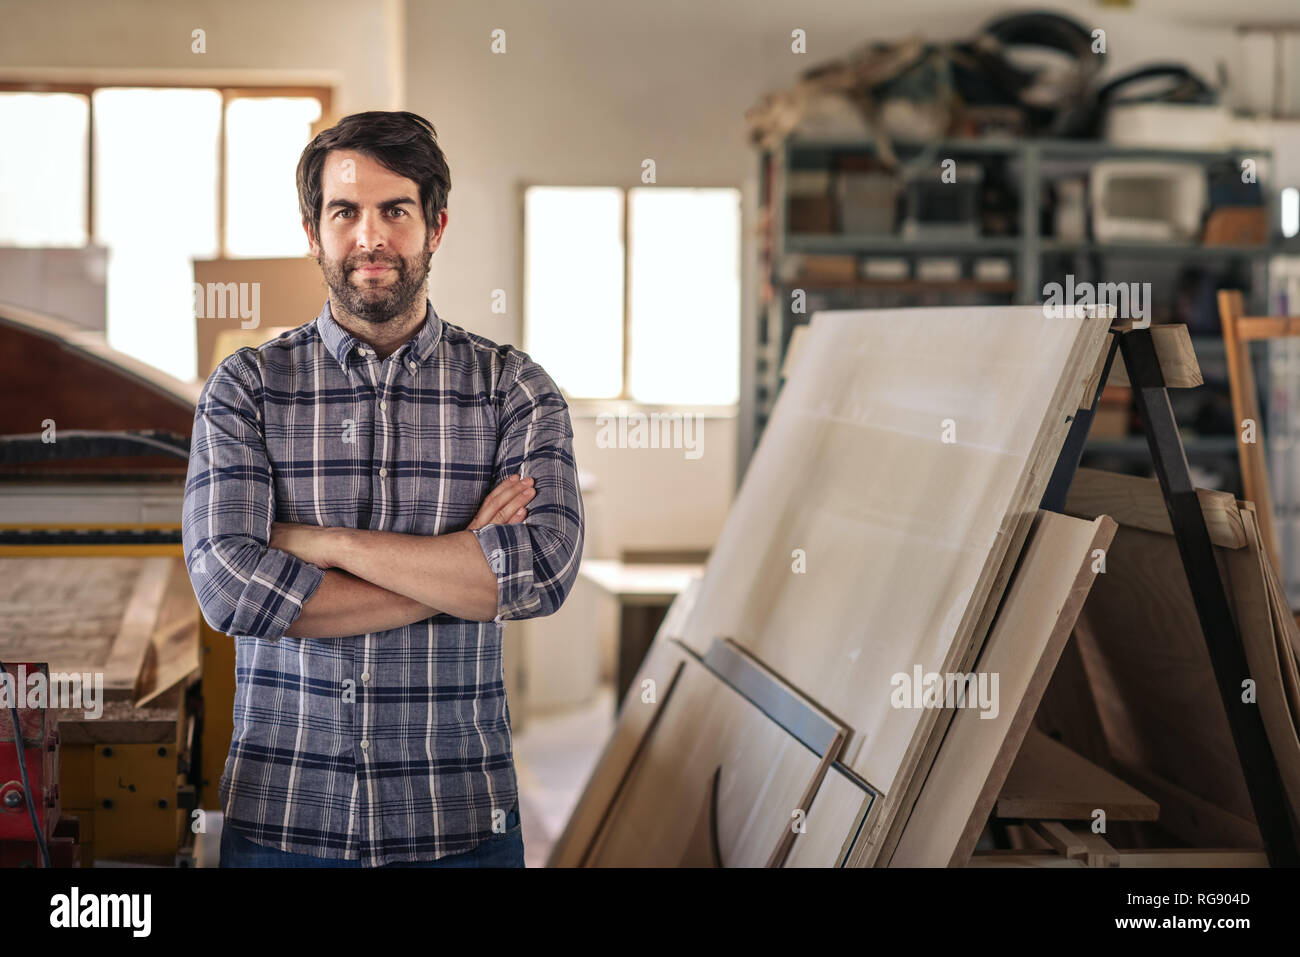 Woodworker standing with his arms crossed in a workshop Stock Photo